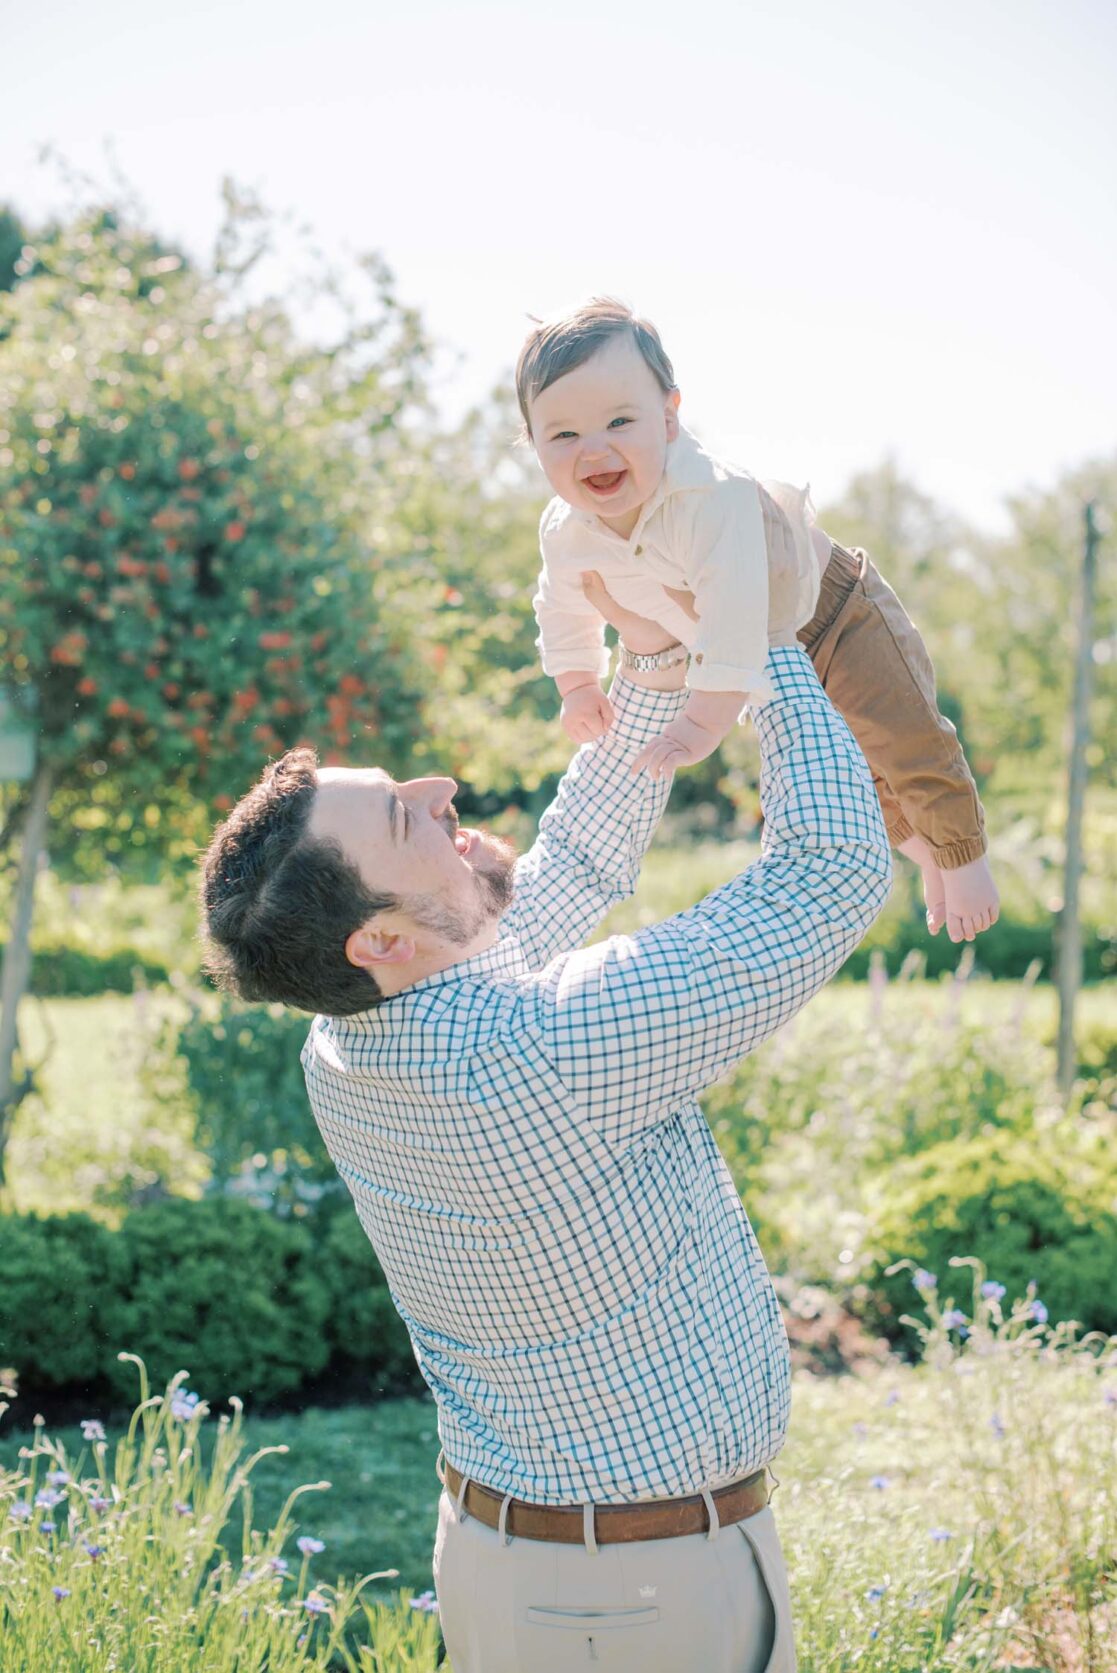 Photo of dad holding baby son up in the air in a garden Richmond baby photographer Jacqueline Aimee Portraits